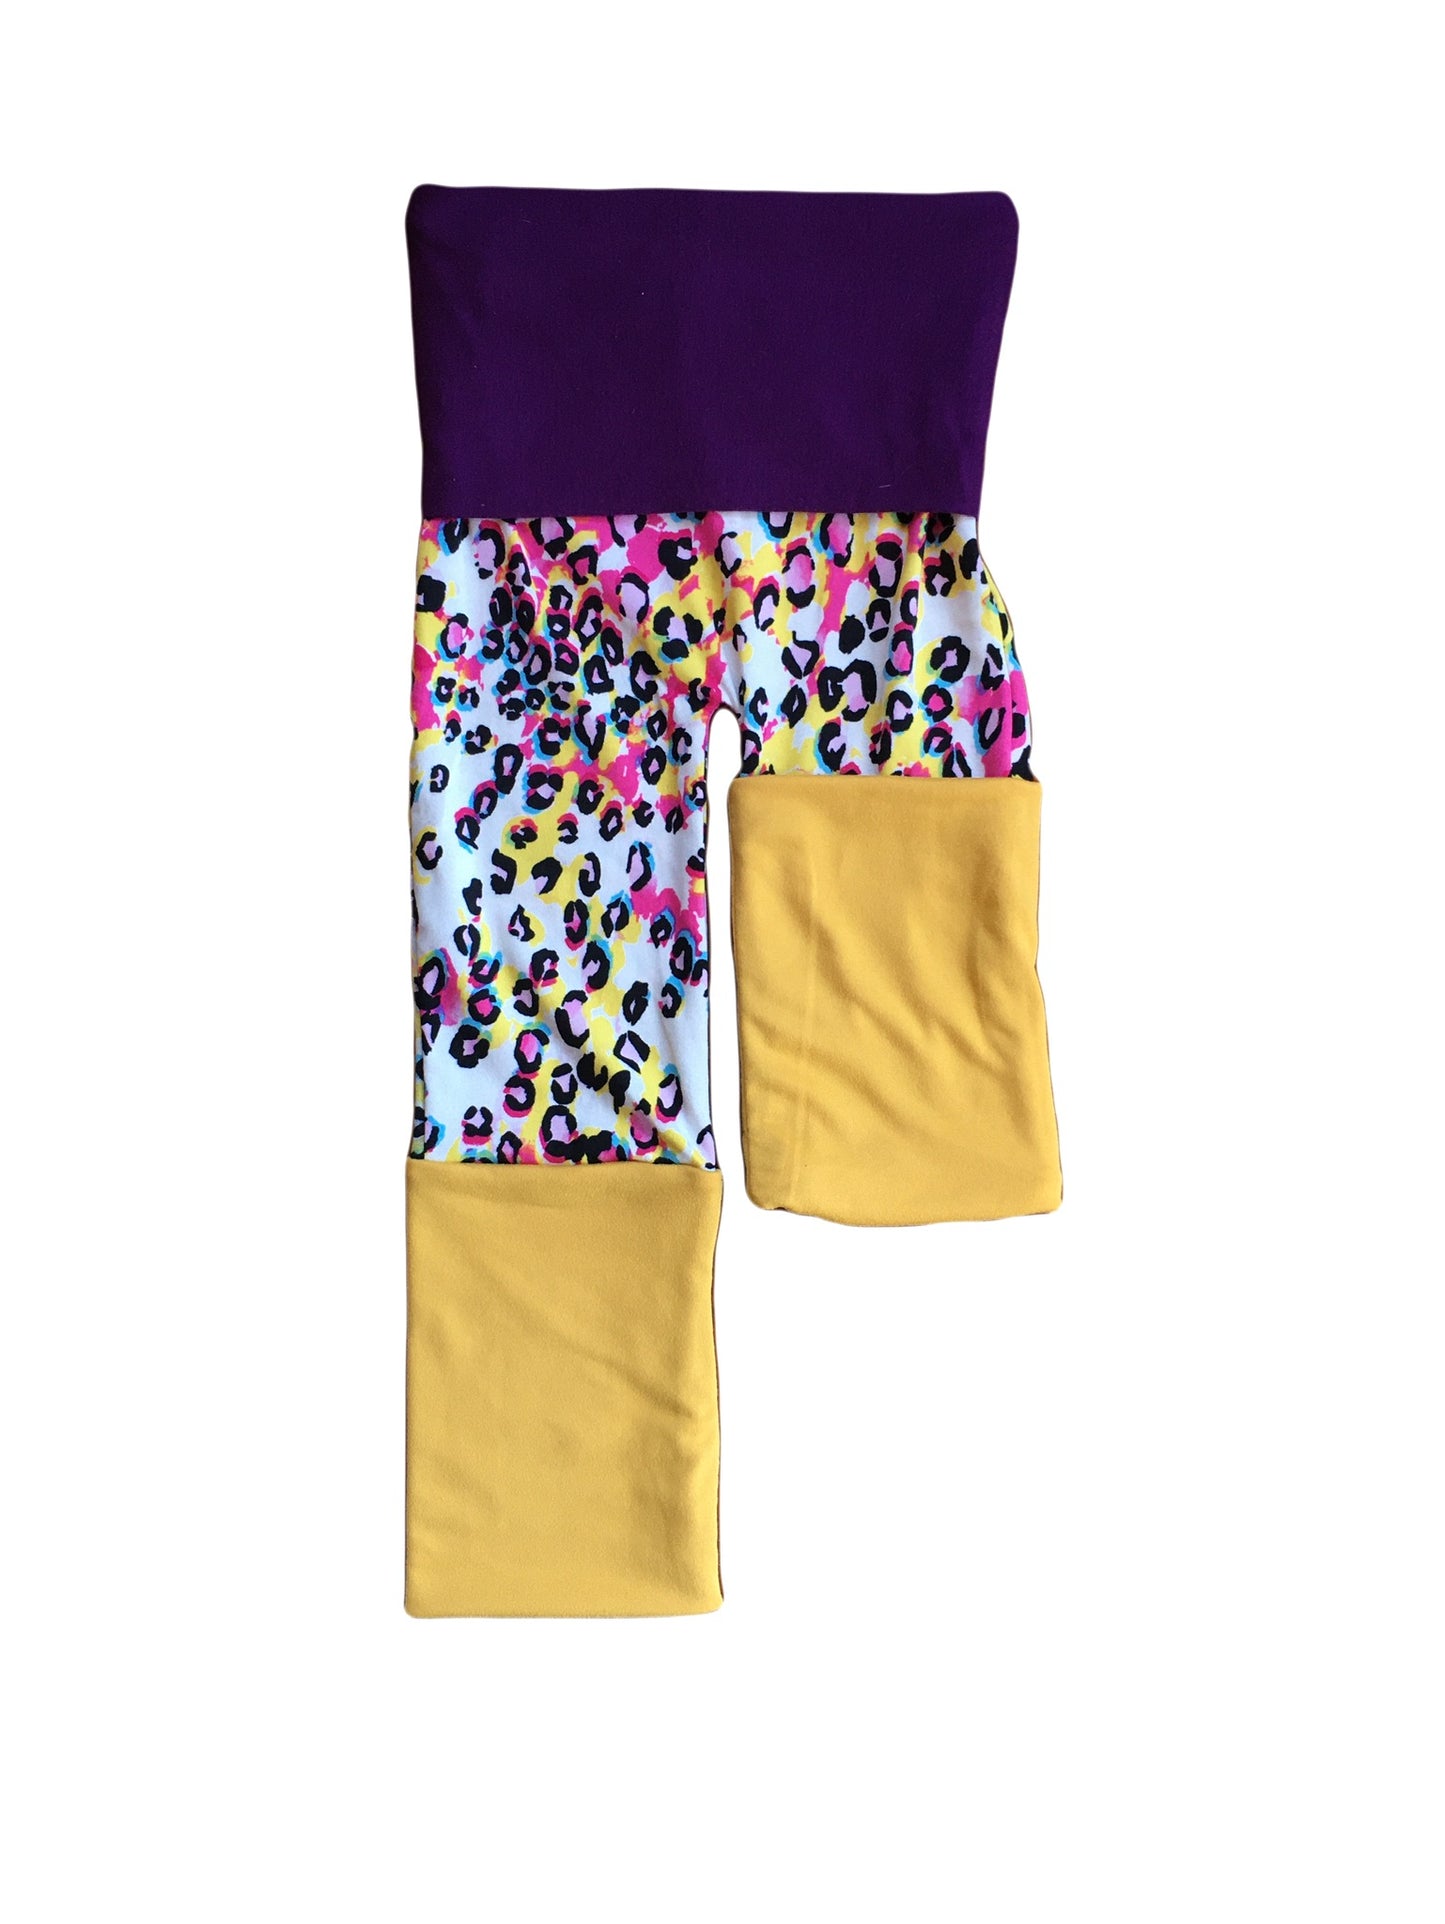 Adjustable Pants - Leopard with Purple & Yellow